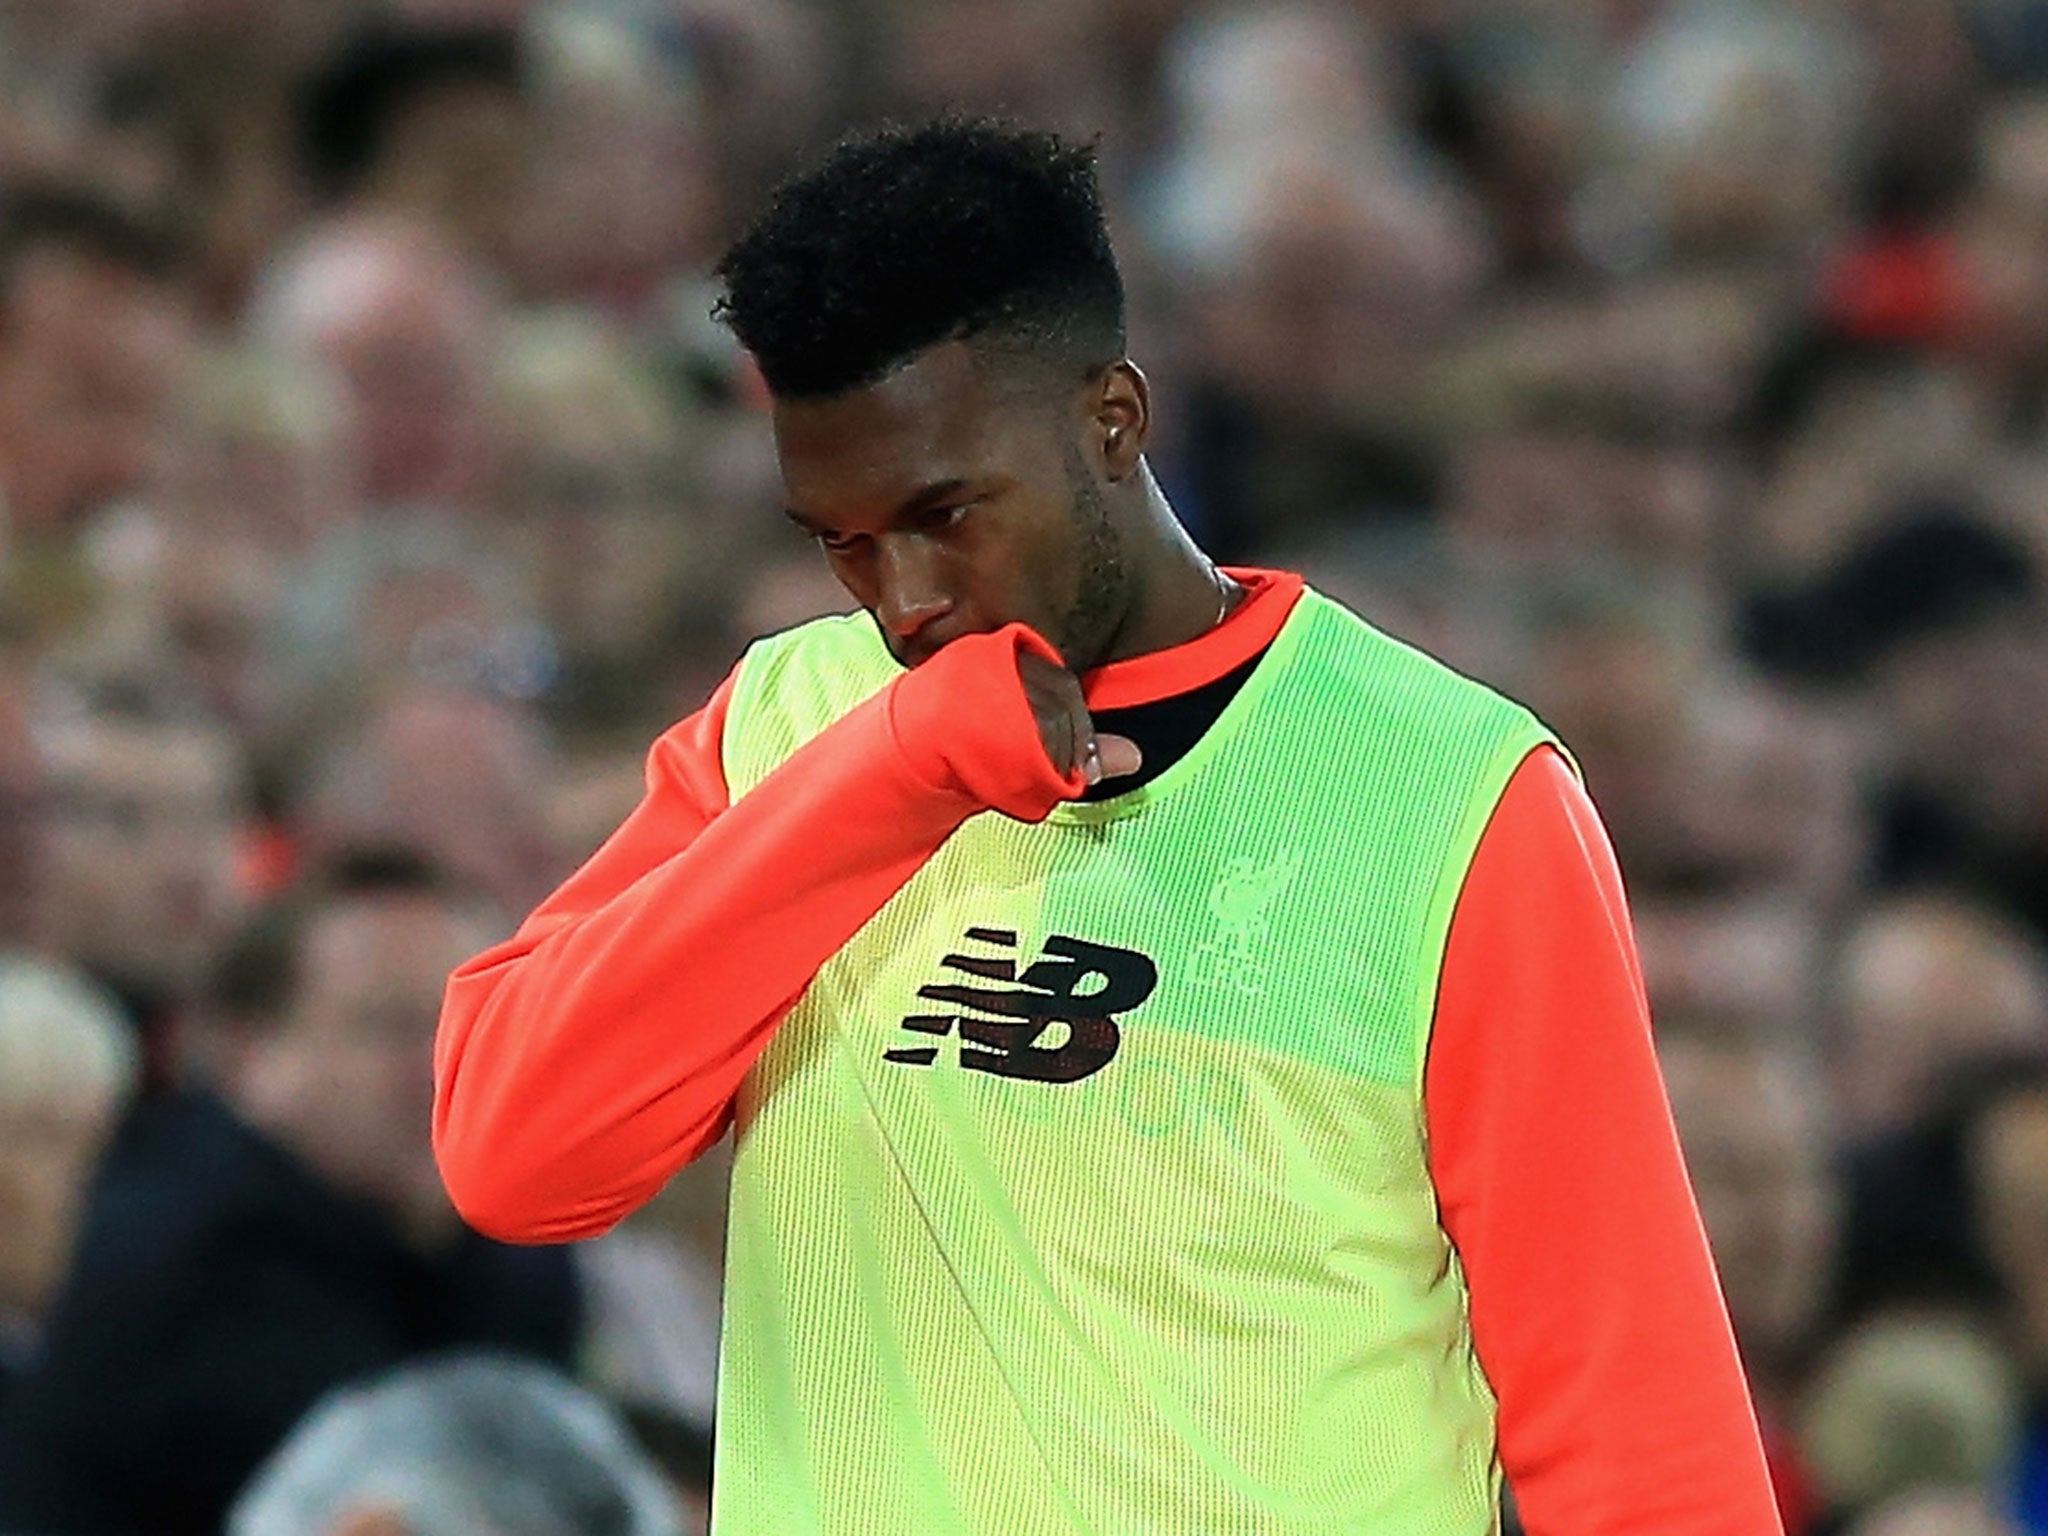 Sturridge has seen his first-team opportunities limited this season